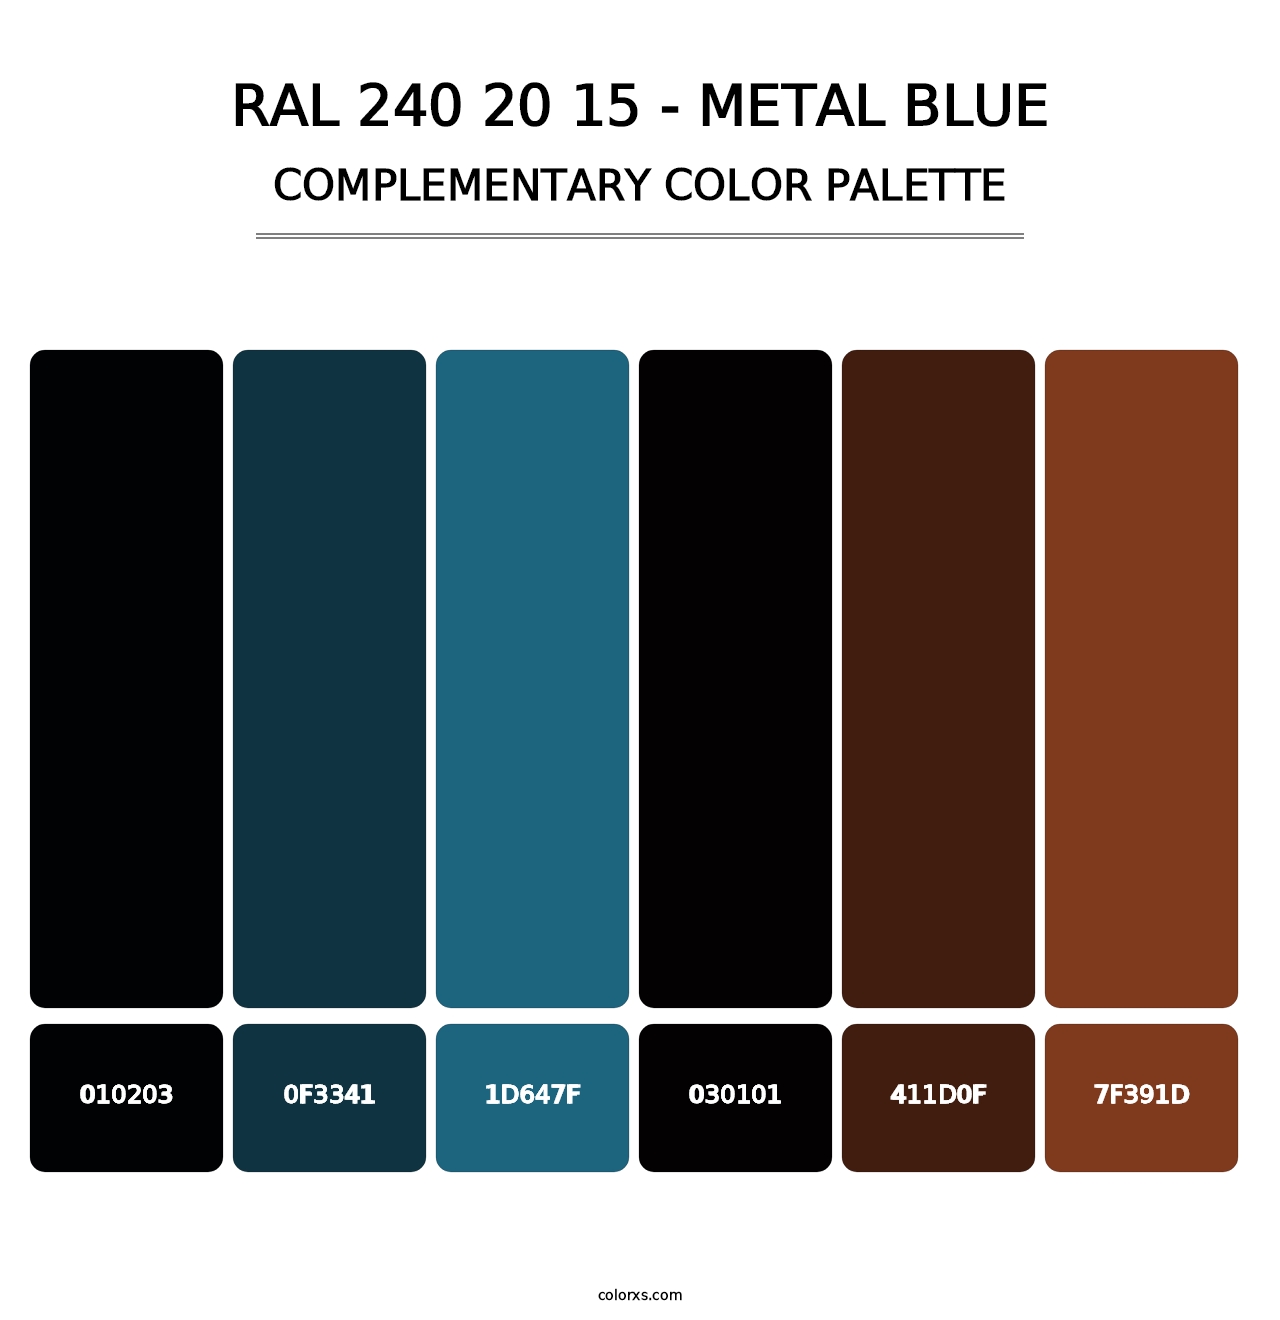 RAL 240 20 15 - Metal Blue - Complementary Color Palette